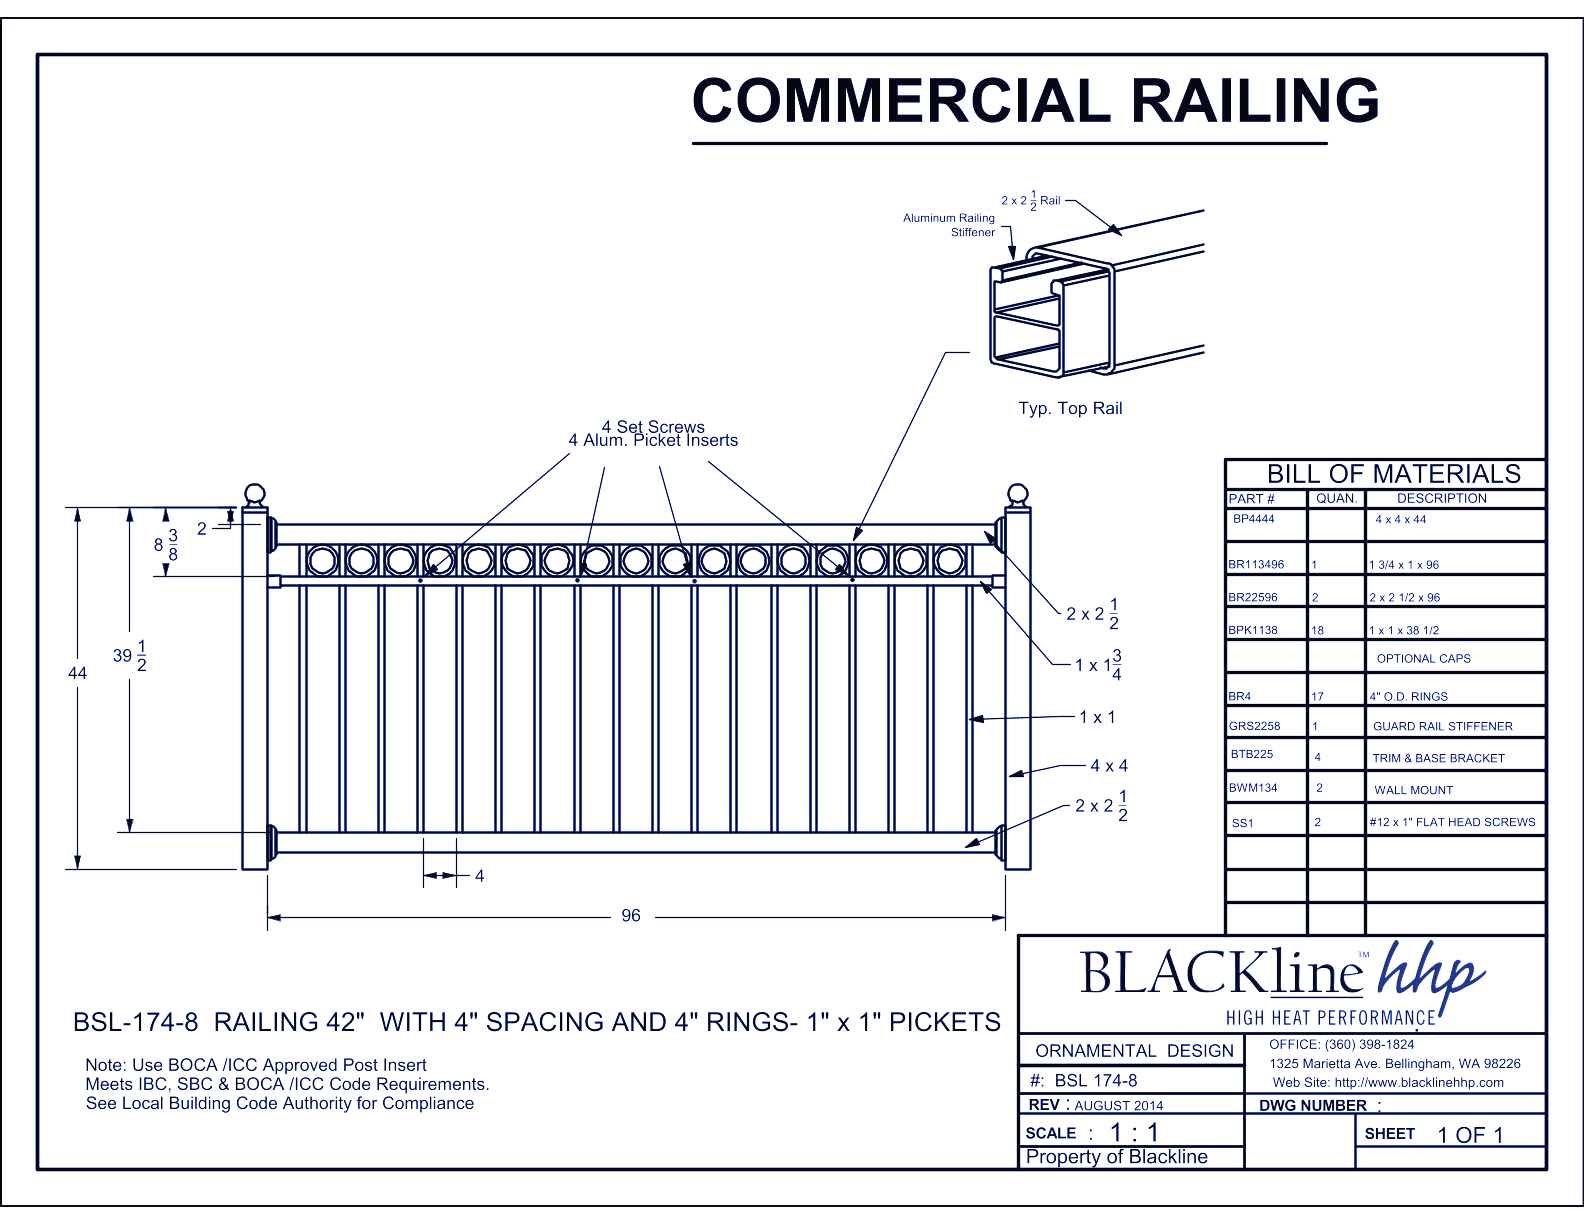 BSL-174-8: Railing 42" with 4" Spacing and 4” Rings - 1" x 1" Pickets